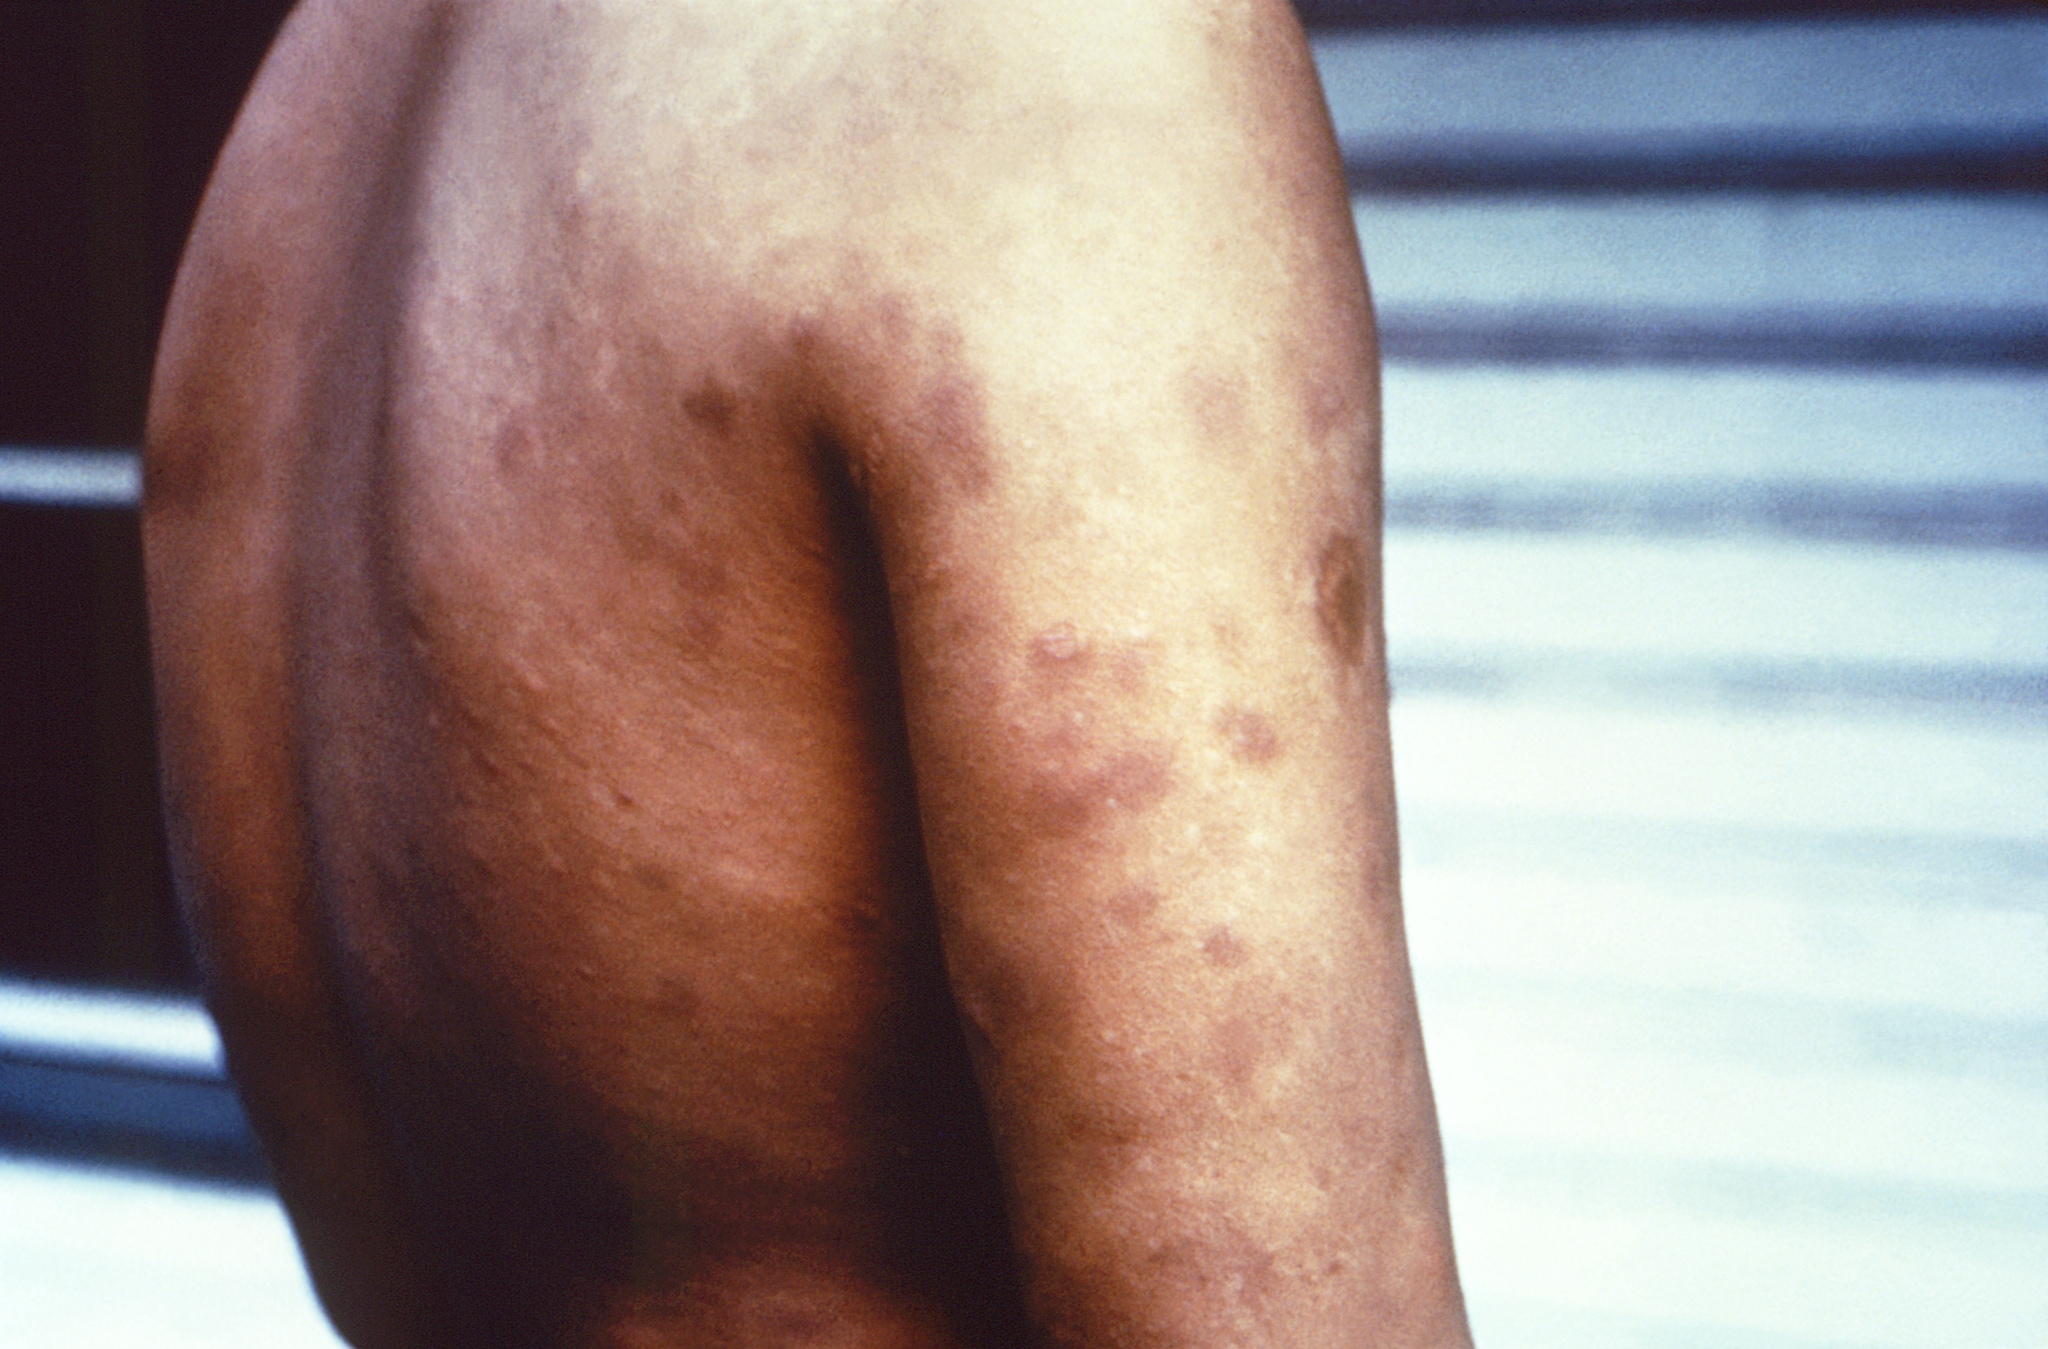 Hansen's disease lesions on a person's back and arms